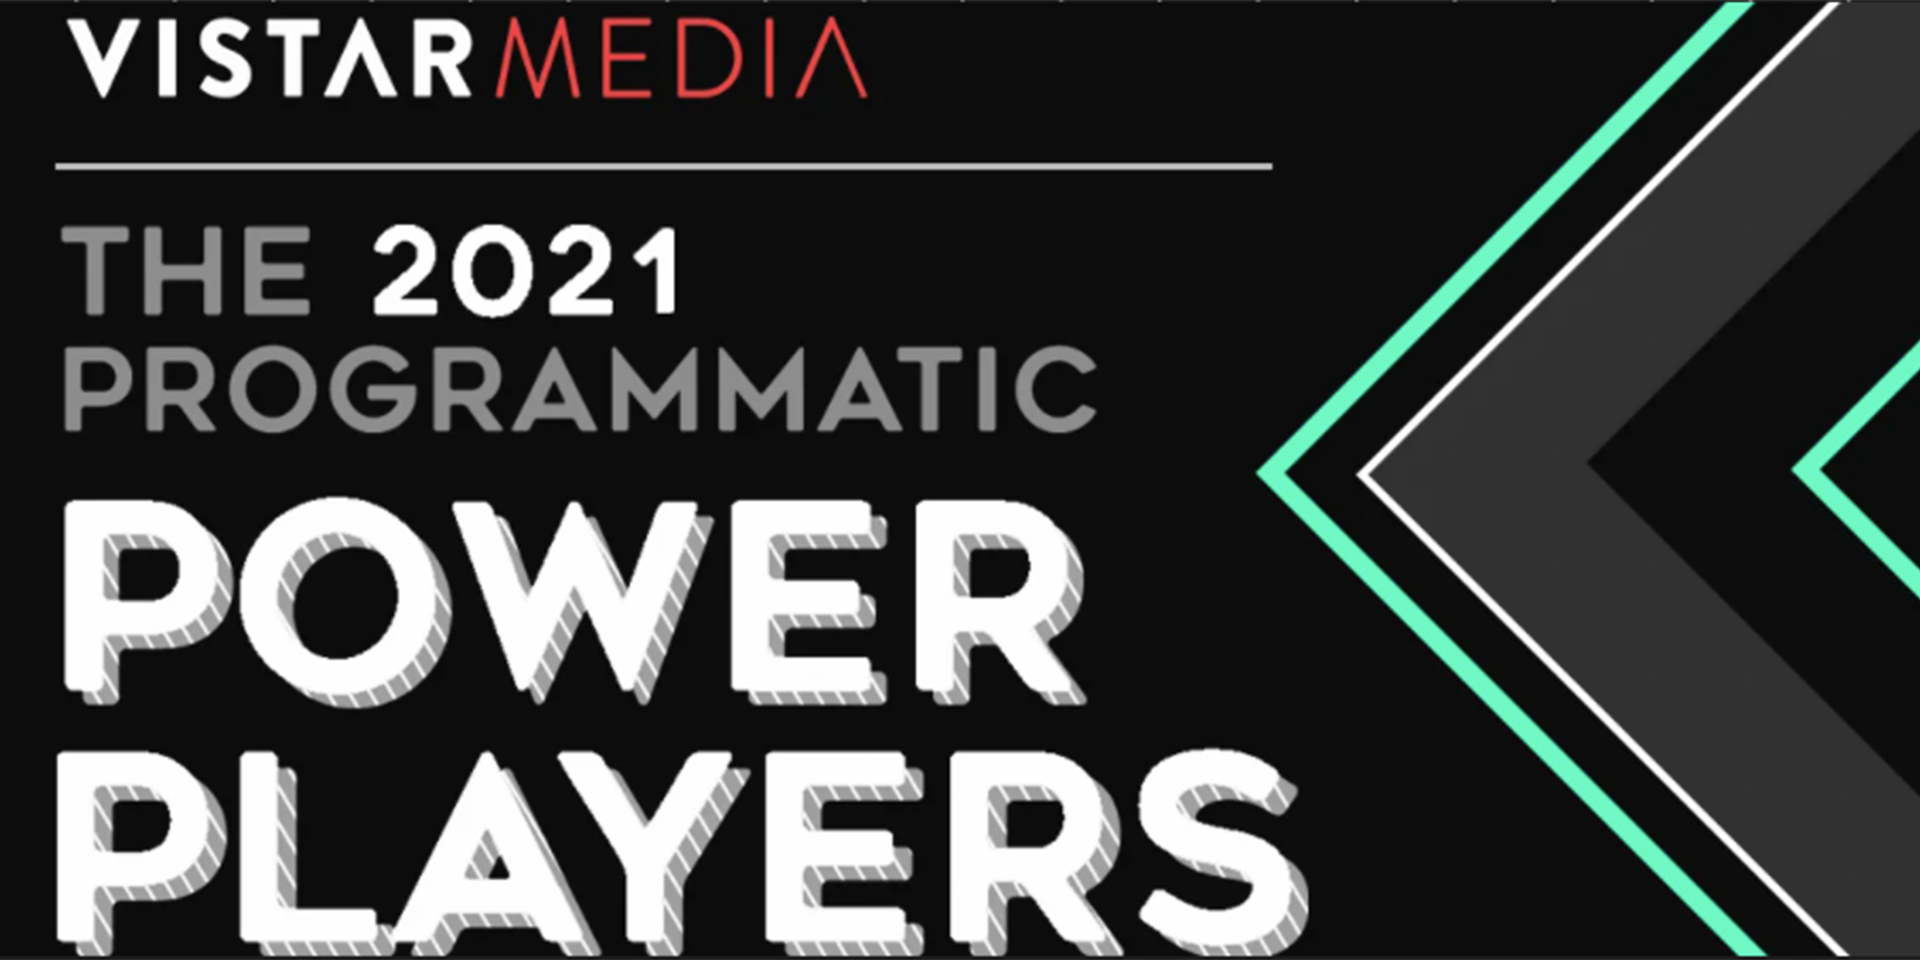 Vistar Media Named as Top Programmatic Power Player by AdExchanger